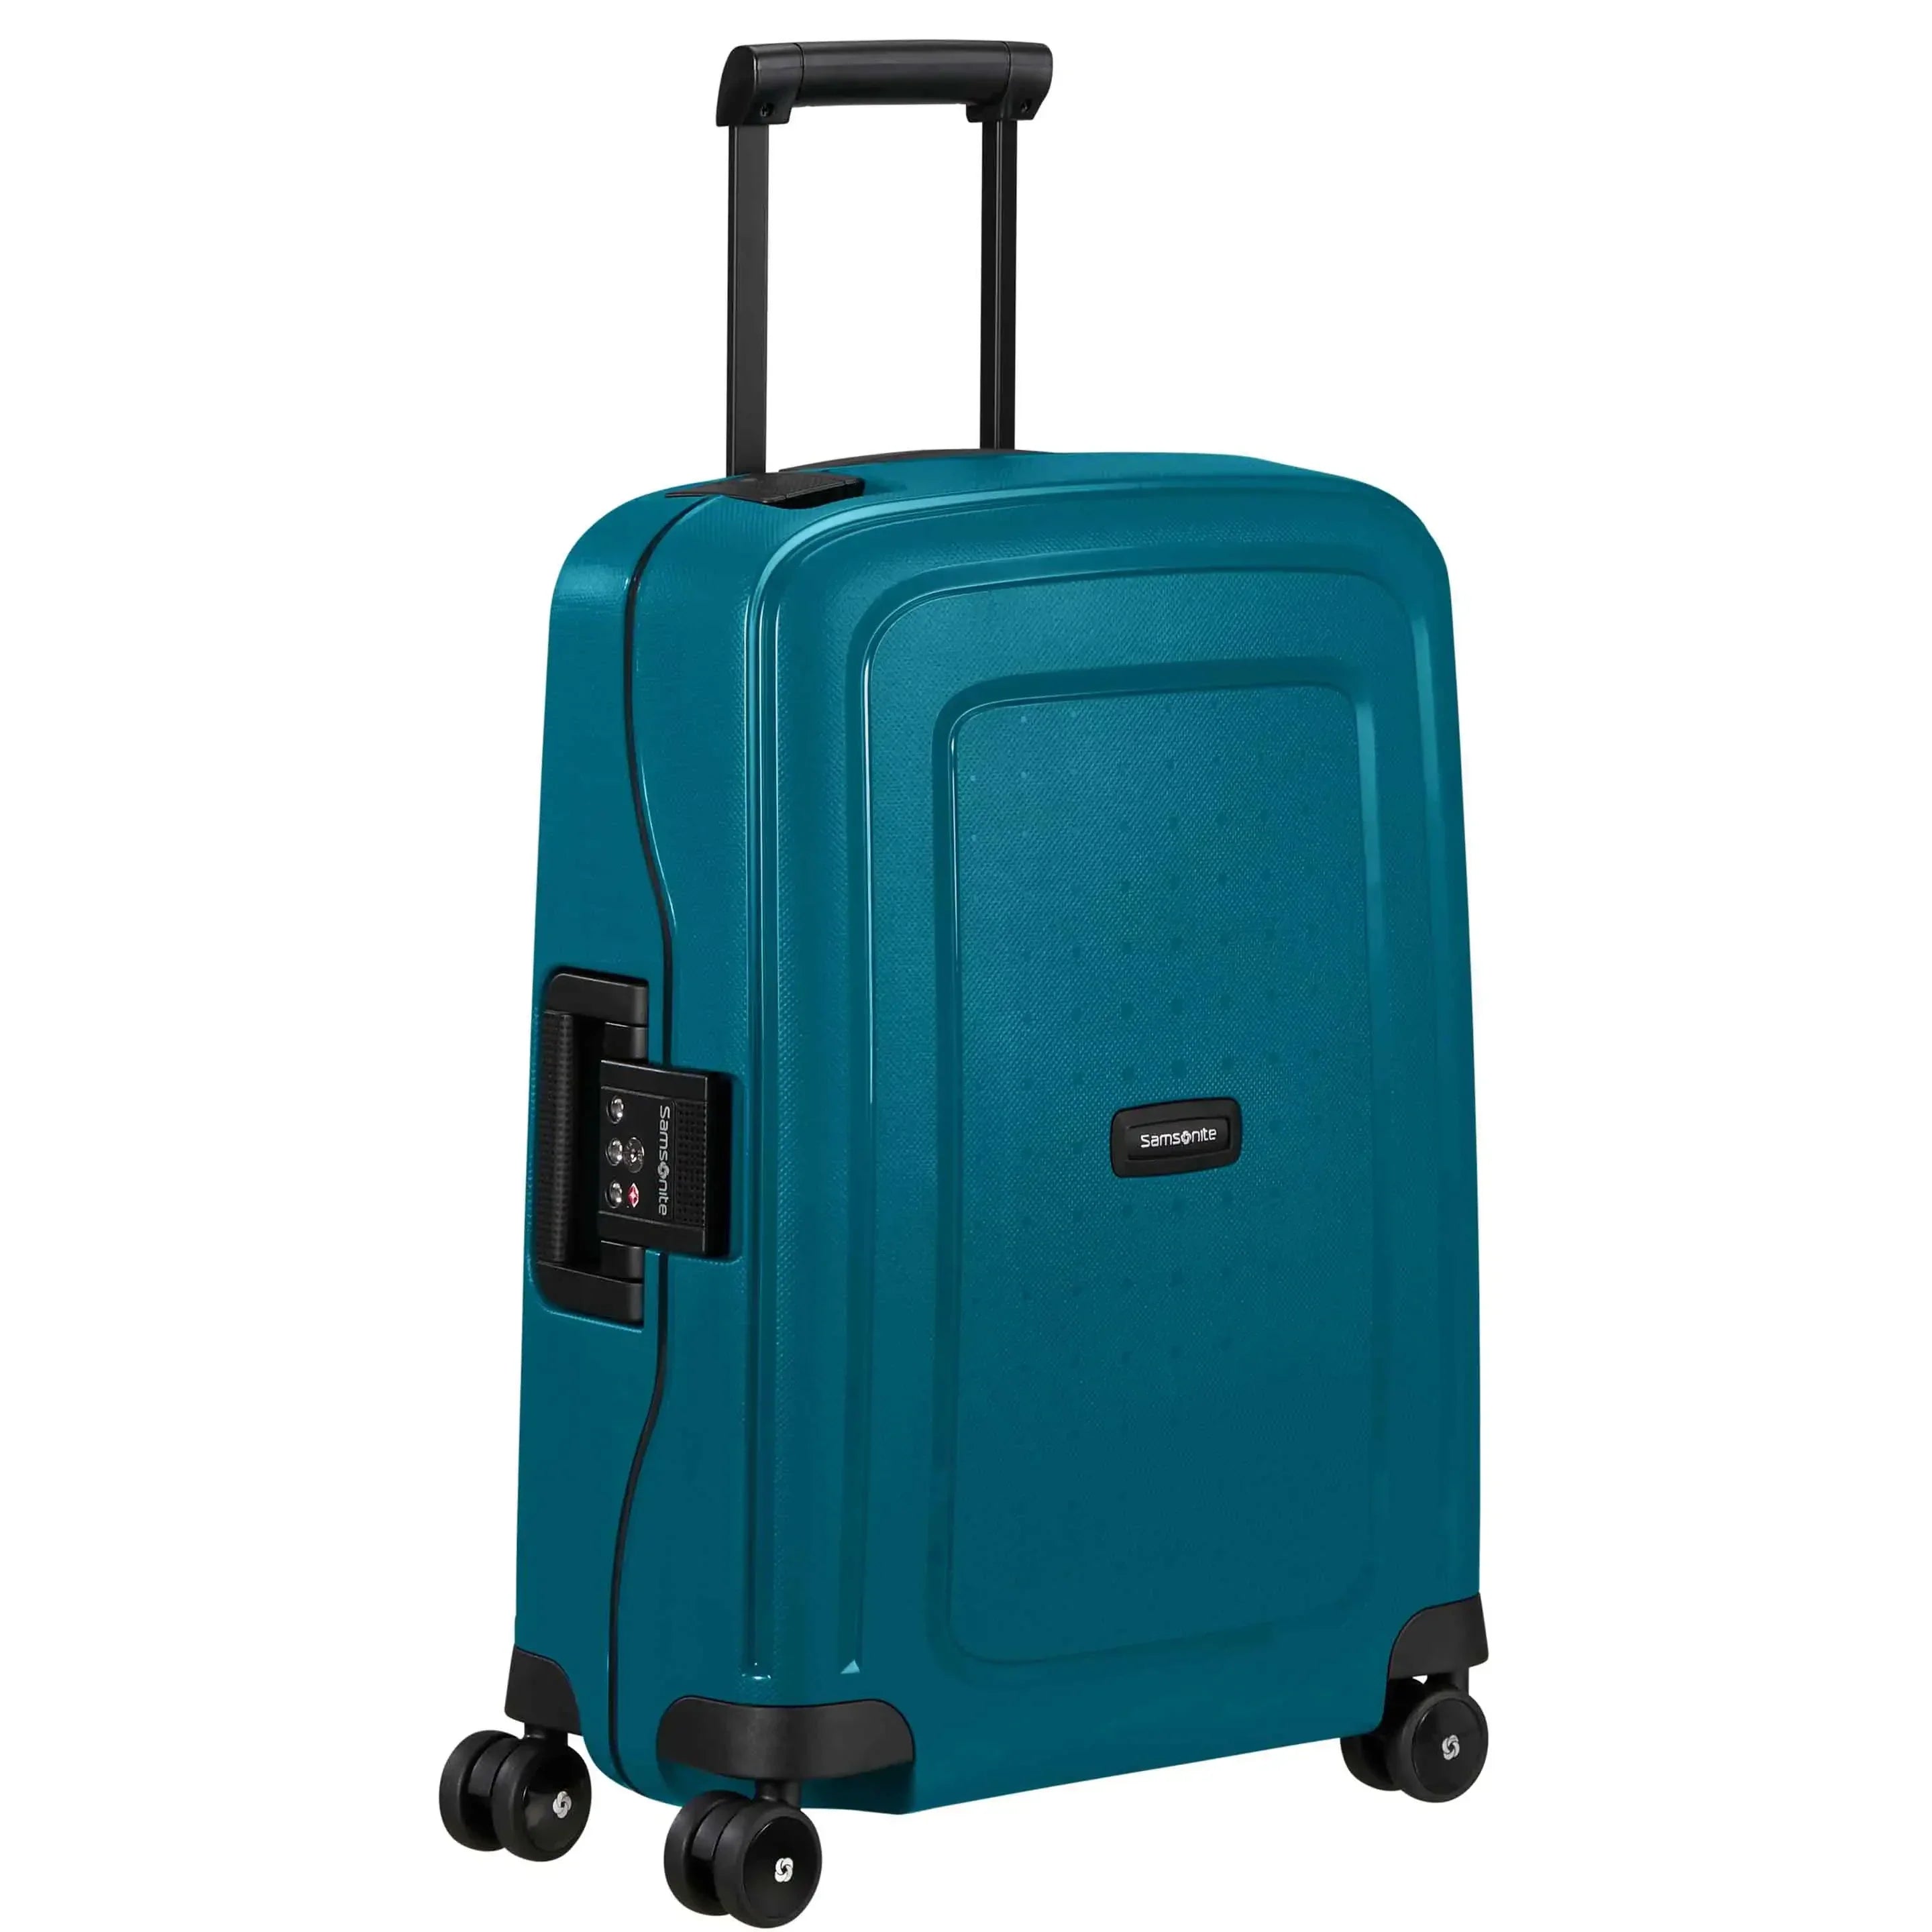 right Samsonite from Page – The 2 luggage